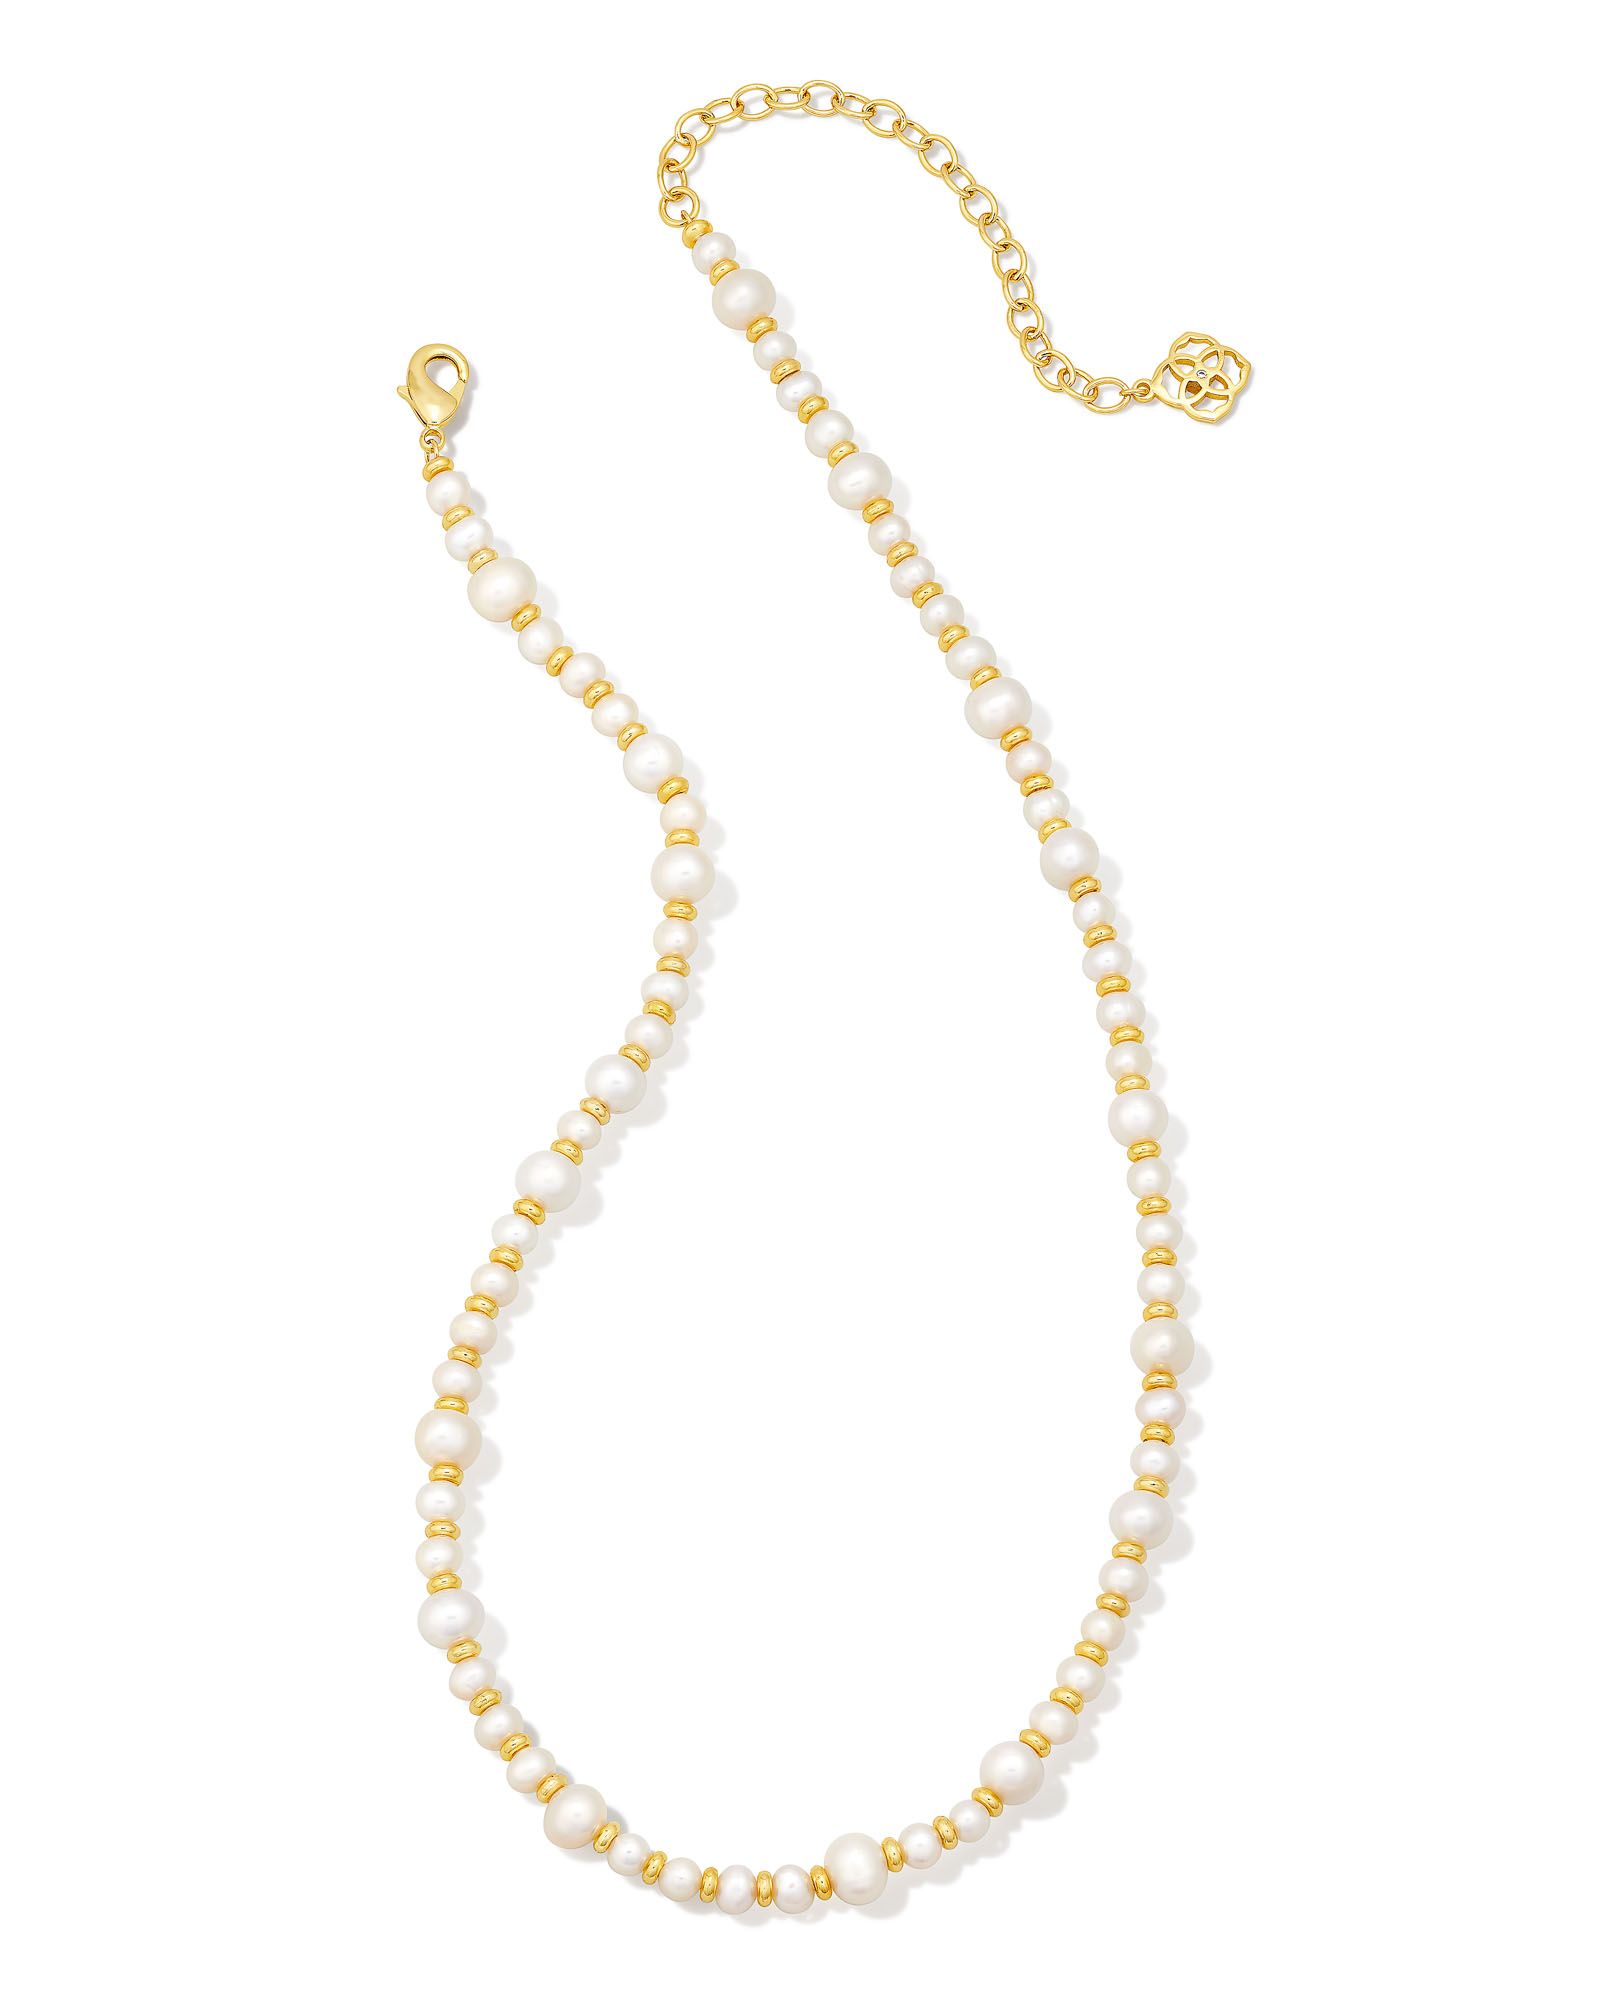 Jovie Gold Beaded Strand Necklace in White Pearl | Kendra Scott